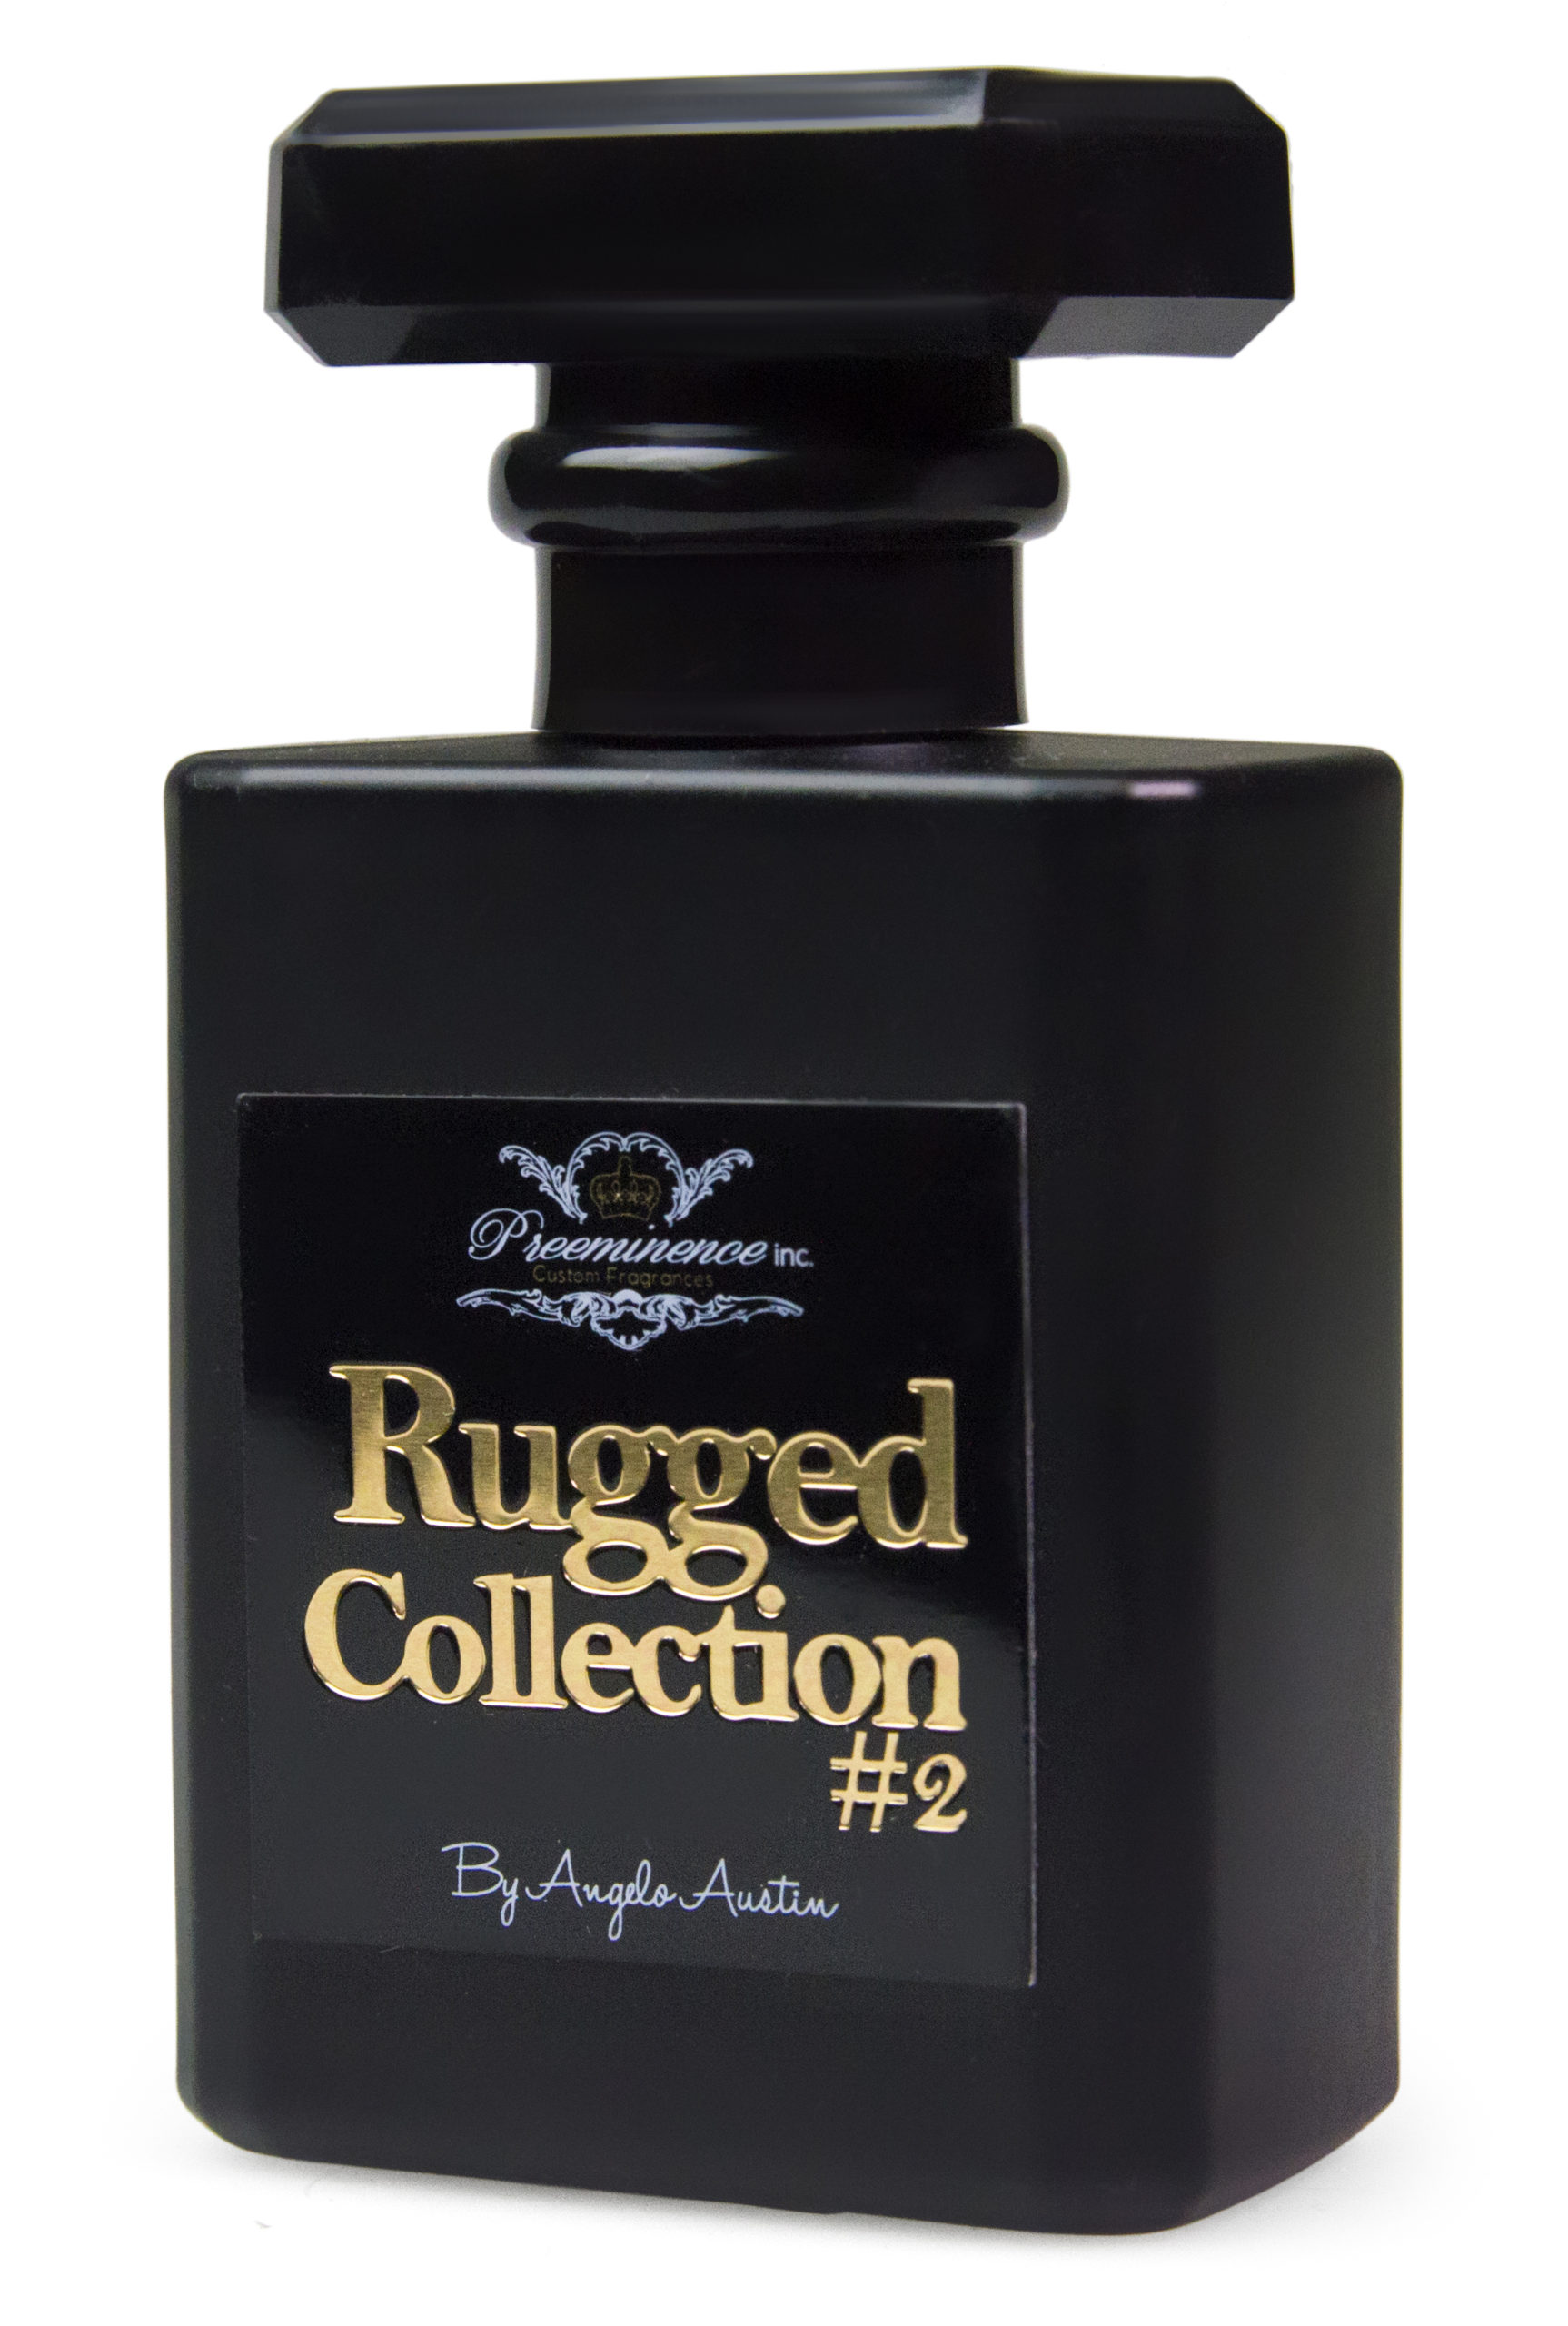 Rugged Collection #2